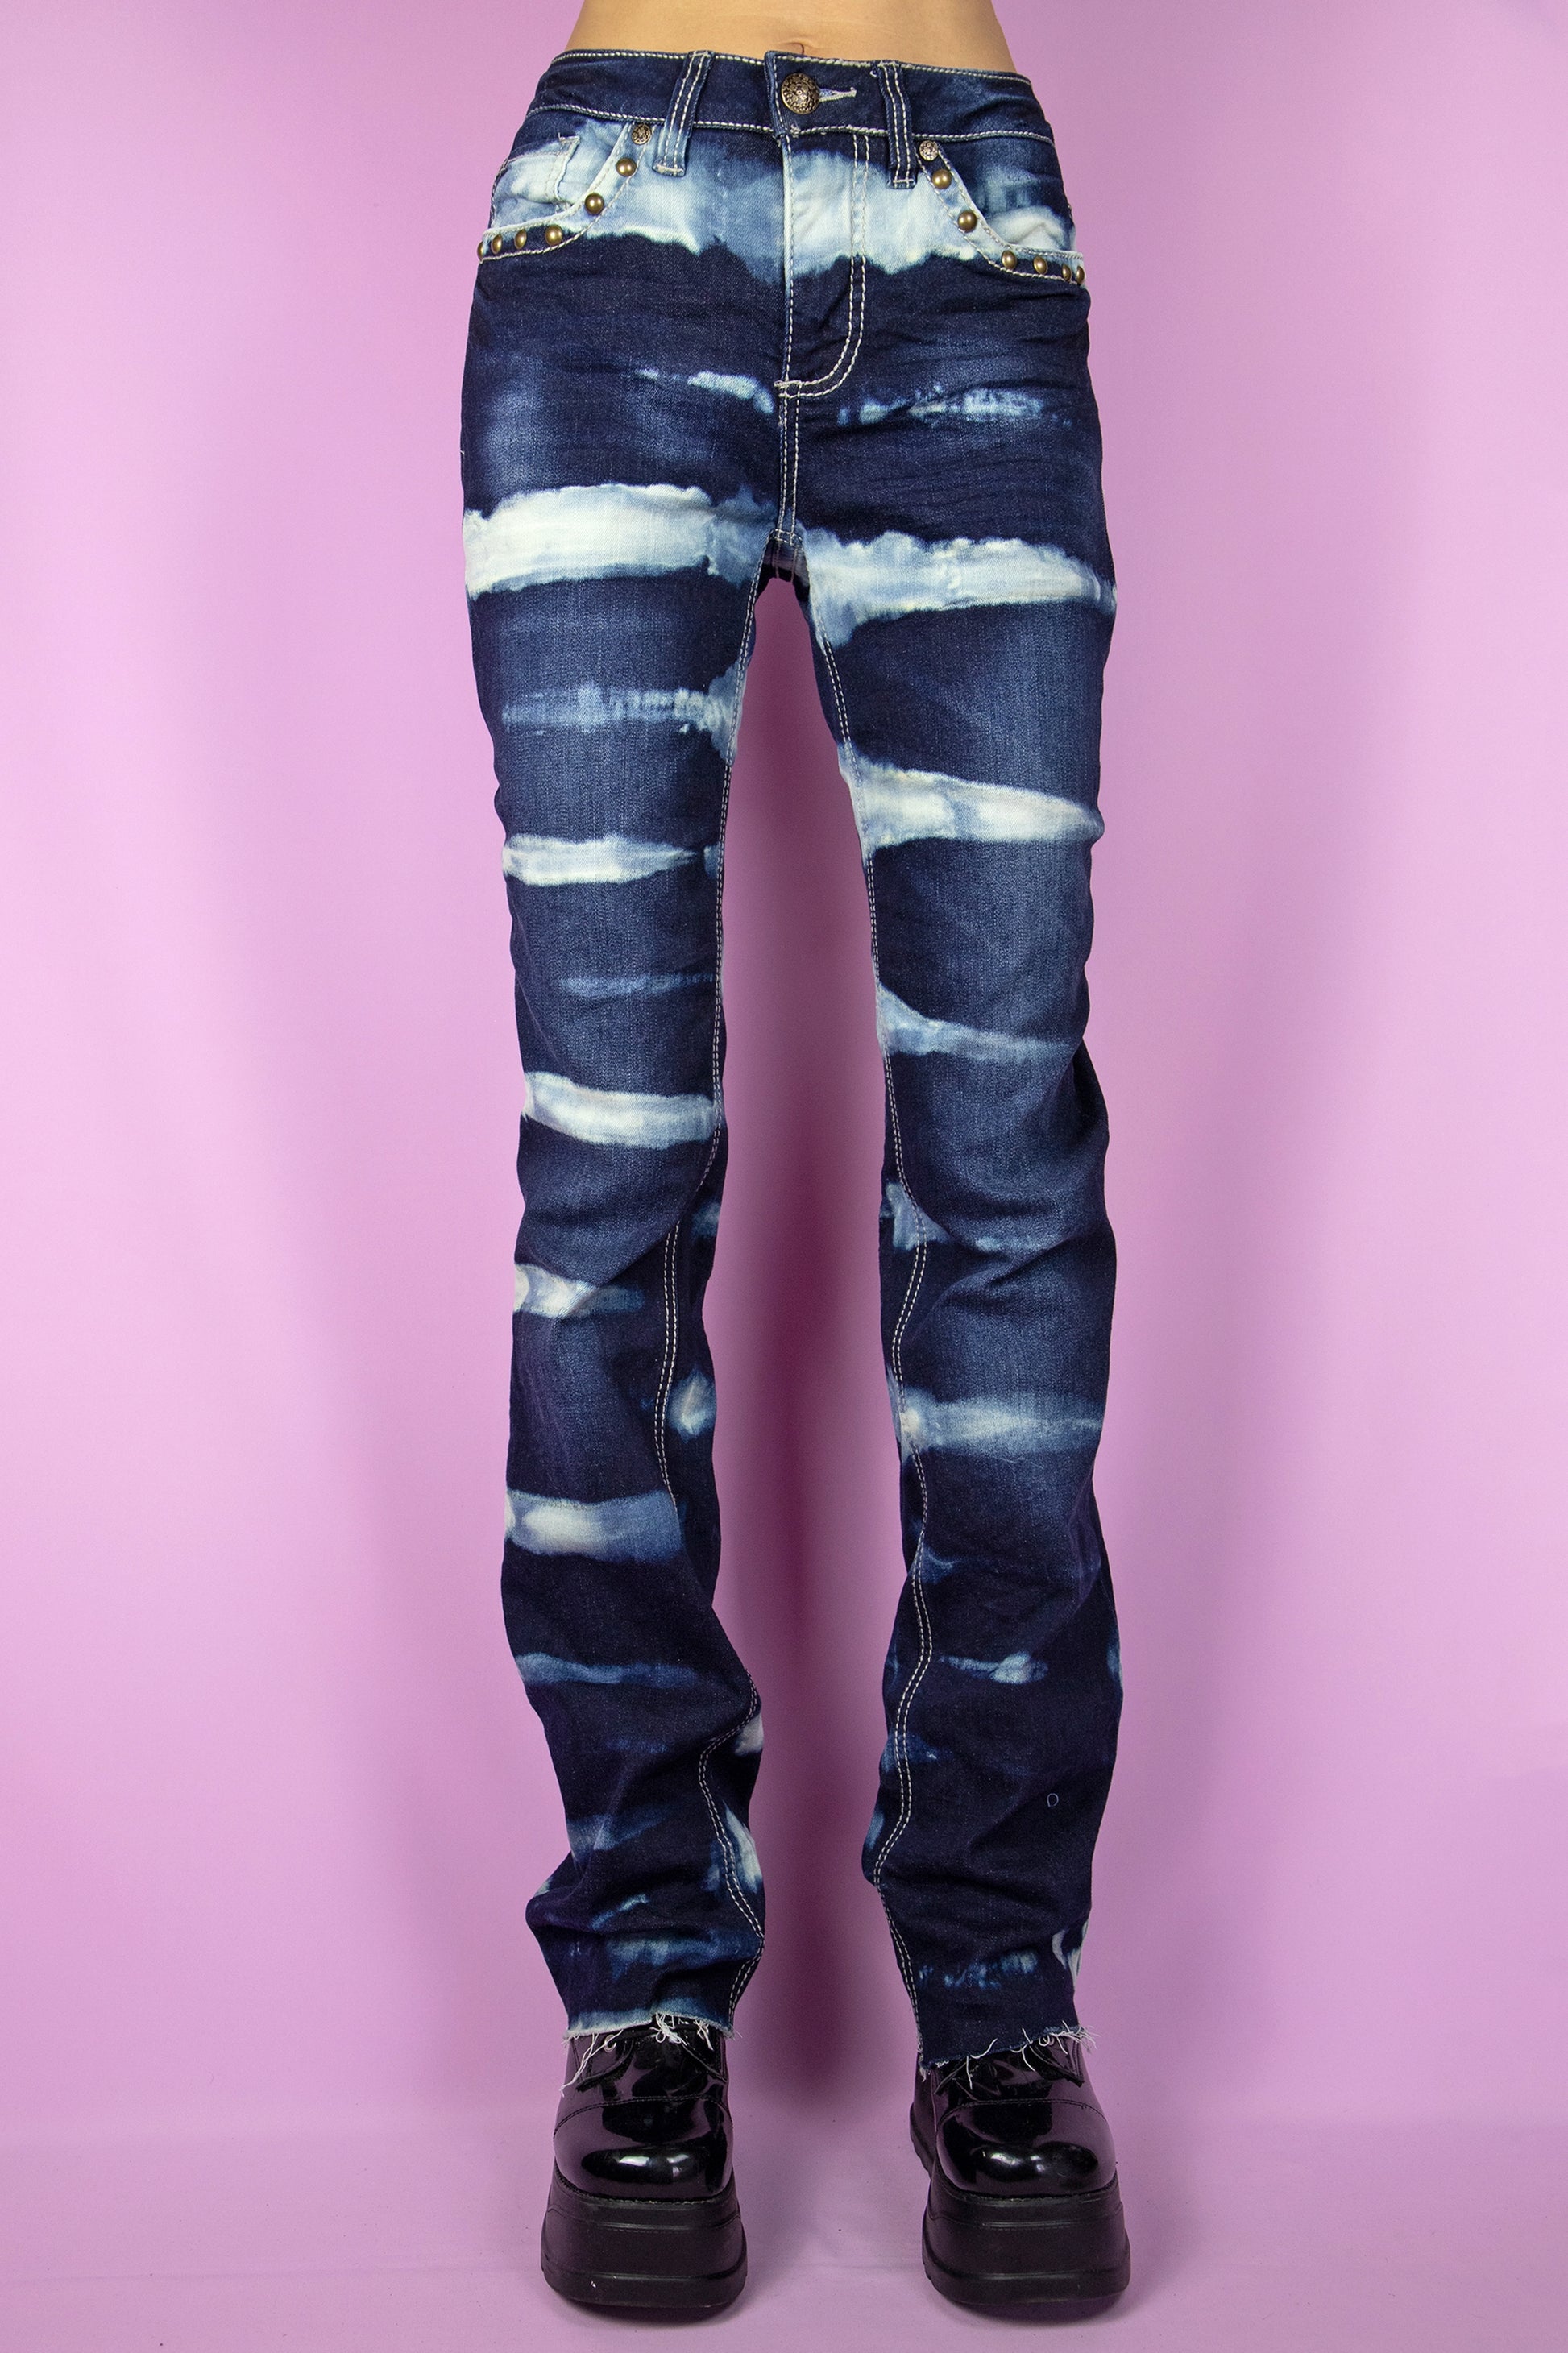 The Vintage Y2K Striped Bleach Jeans are straight stretch denim pants adorned with bleached stripes, featuring pockets and a raw hem. These iconic millennium cyber custom jeans from the 2000s are the perfect choice for festivals, raves, and clubbing.